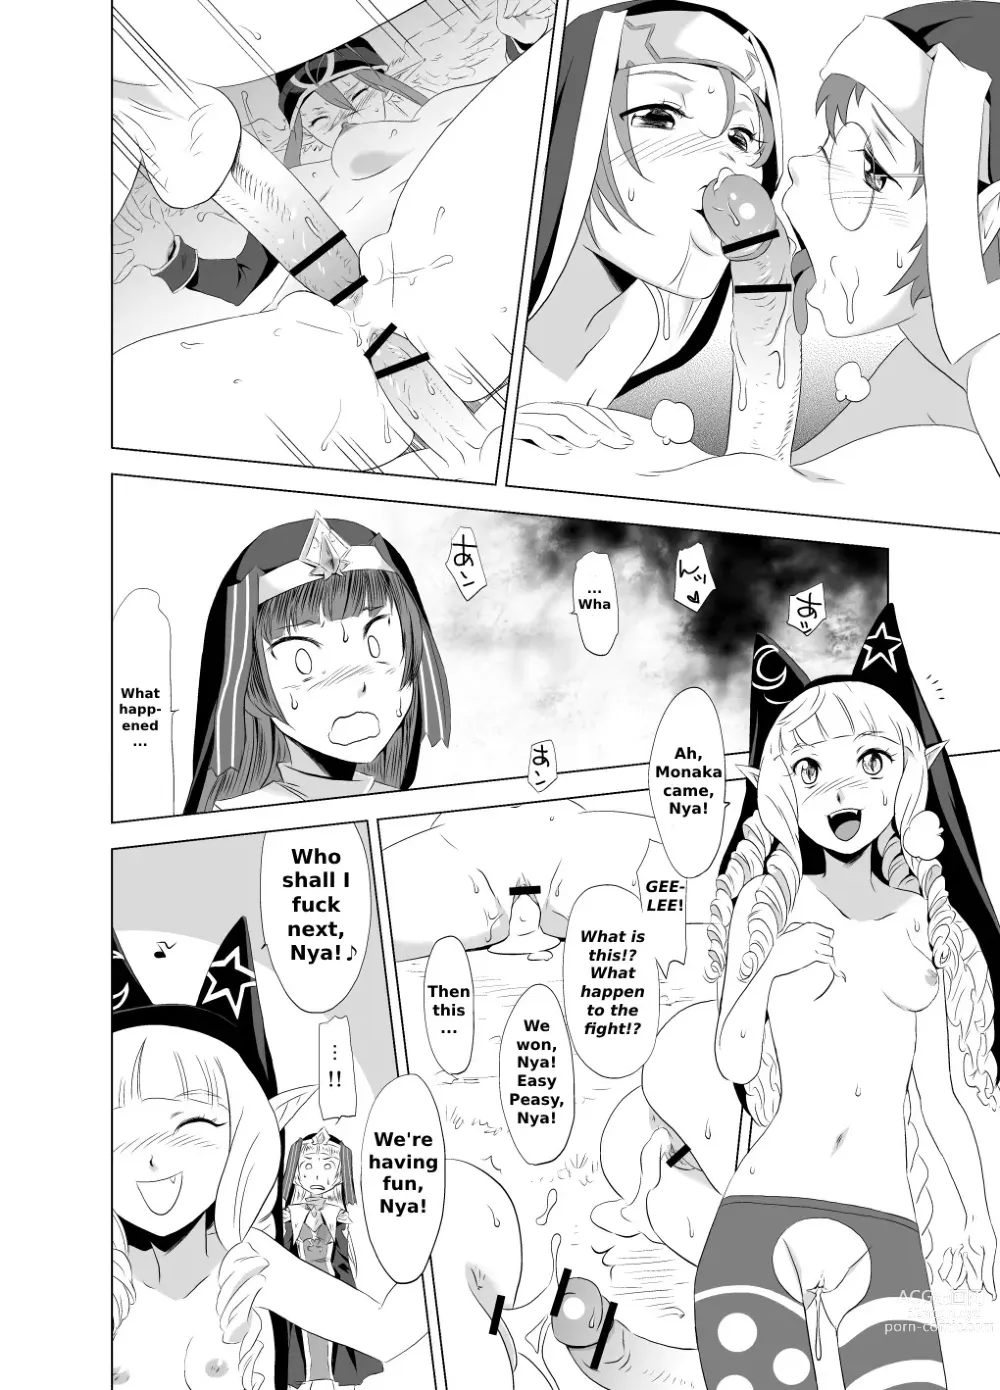 Page 14 of doujinshi 2nd RIDE -Battle Sister crisiS-